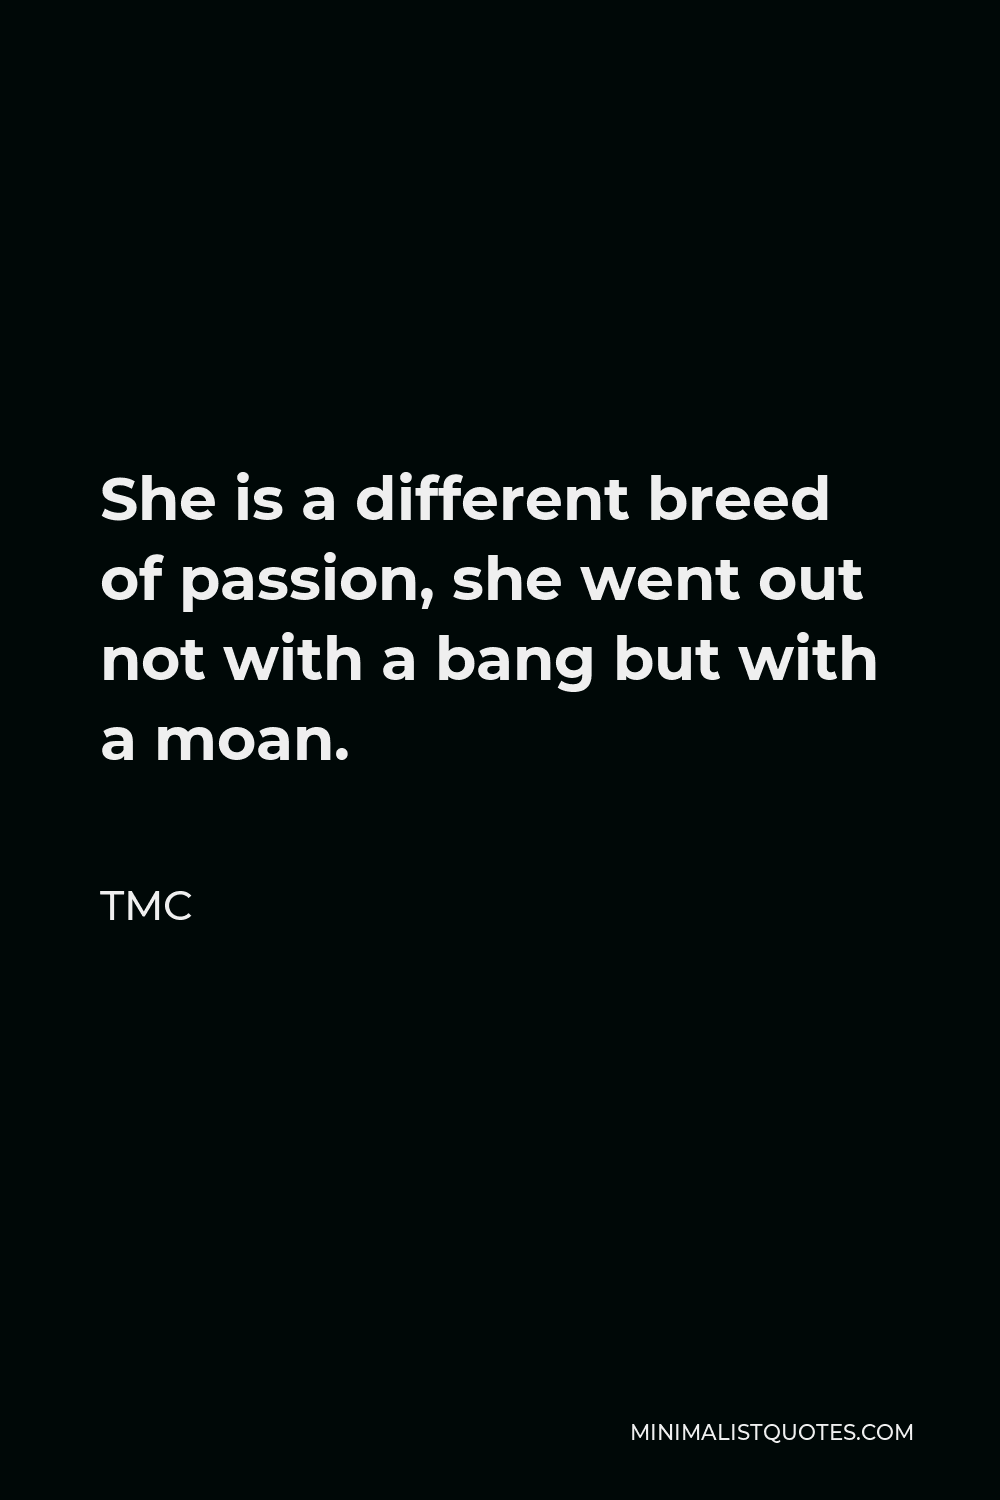 TMC Quote - She is a different breed of passion, she went out not with a bang but with a moan.